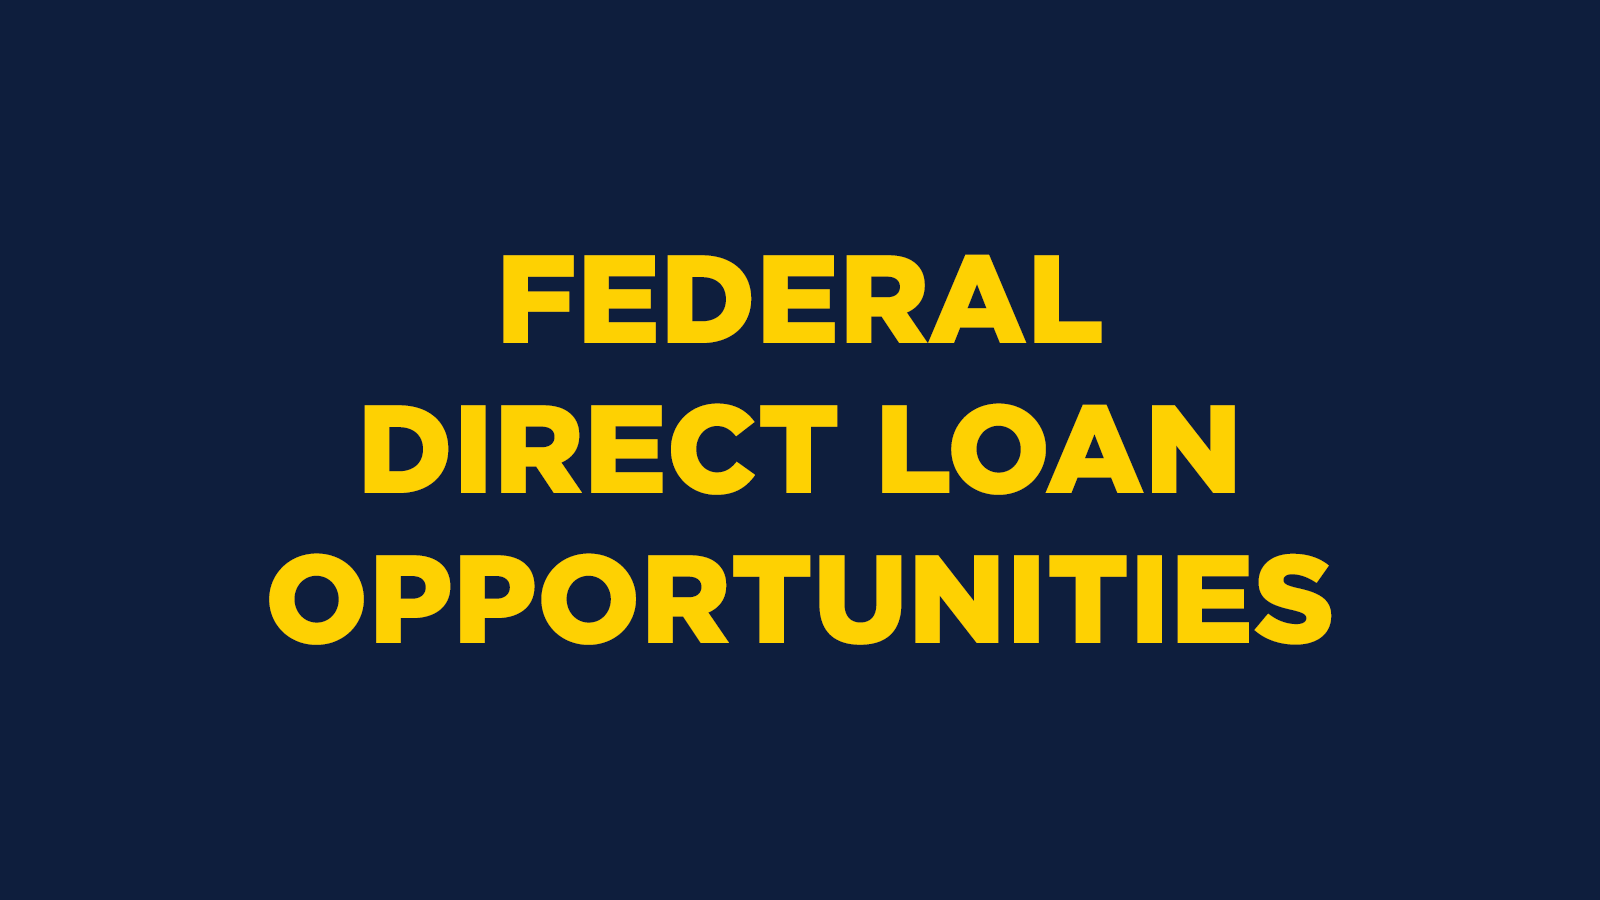 Federal Direct Loan Opportunities